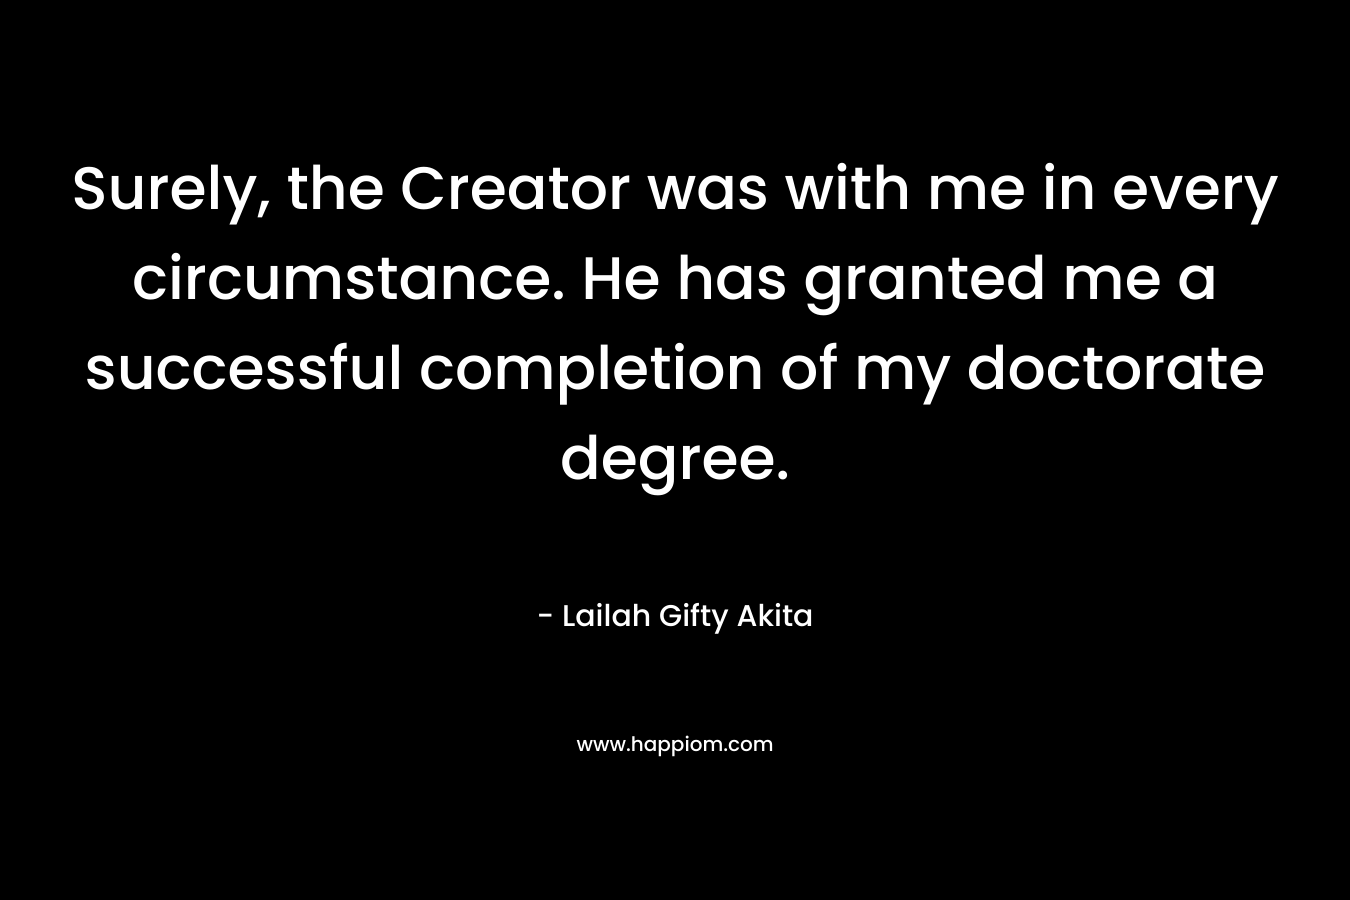 Surely, the Creator was with me in every circumstance. He has granted me a successful completion of my doctorate degree.